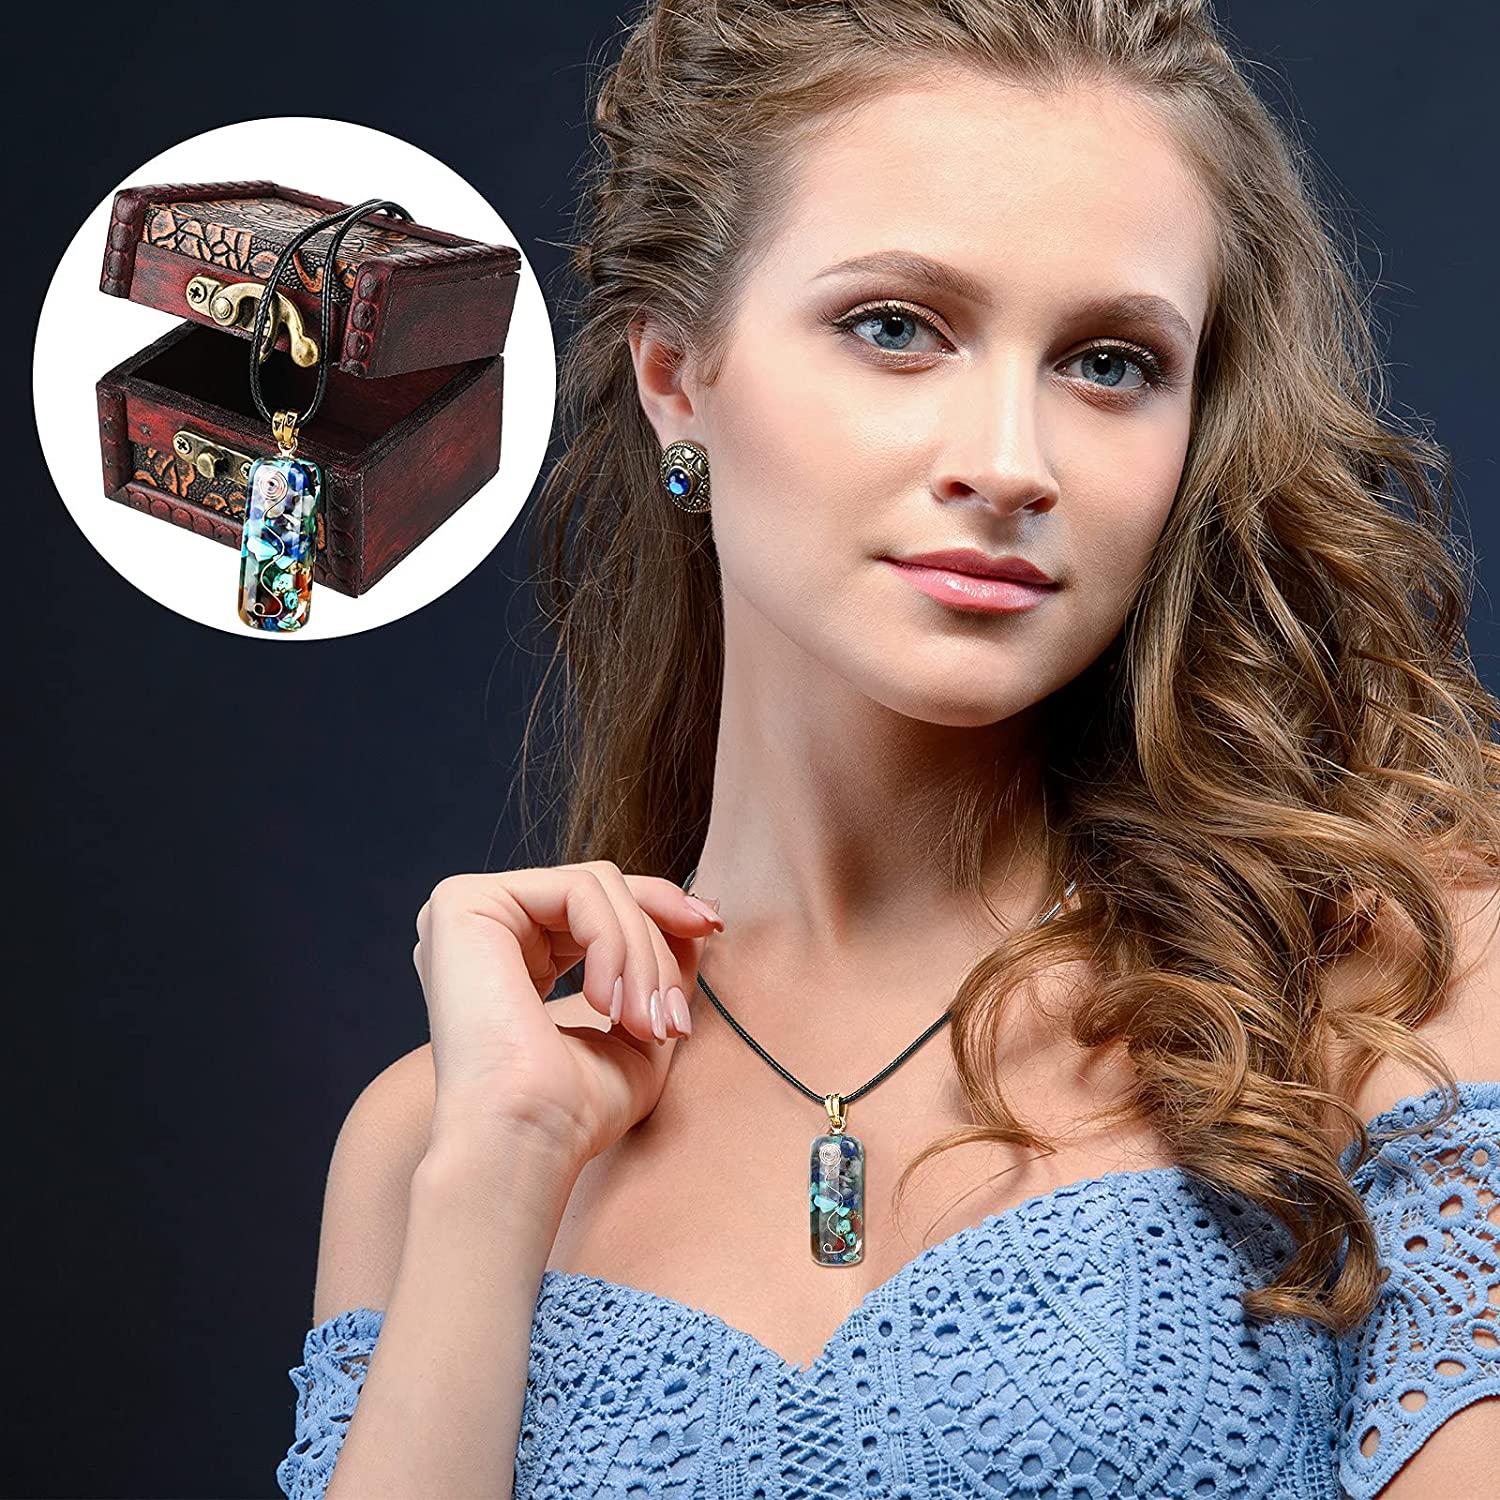 4 Pieces Orgone Chakra Healing Necklace in Hand-Carved Wooden Box, Crystal  Vibe Orgone 7 Chakra Necklace with Spiritual Pendant Adjustable Cord,  Healing Stone Gemstone Necklace for Balancing Energy